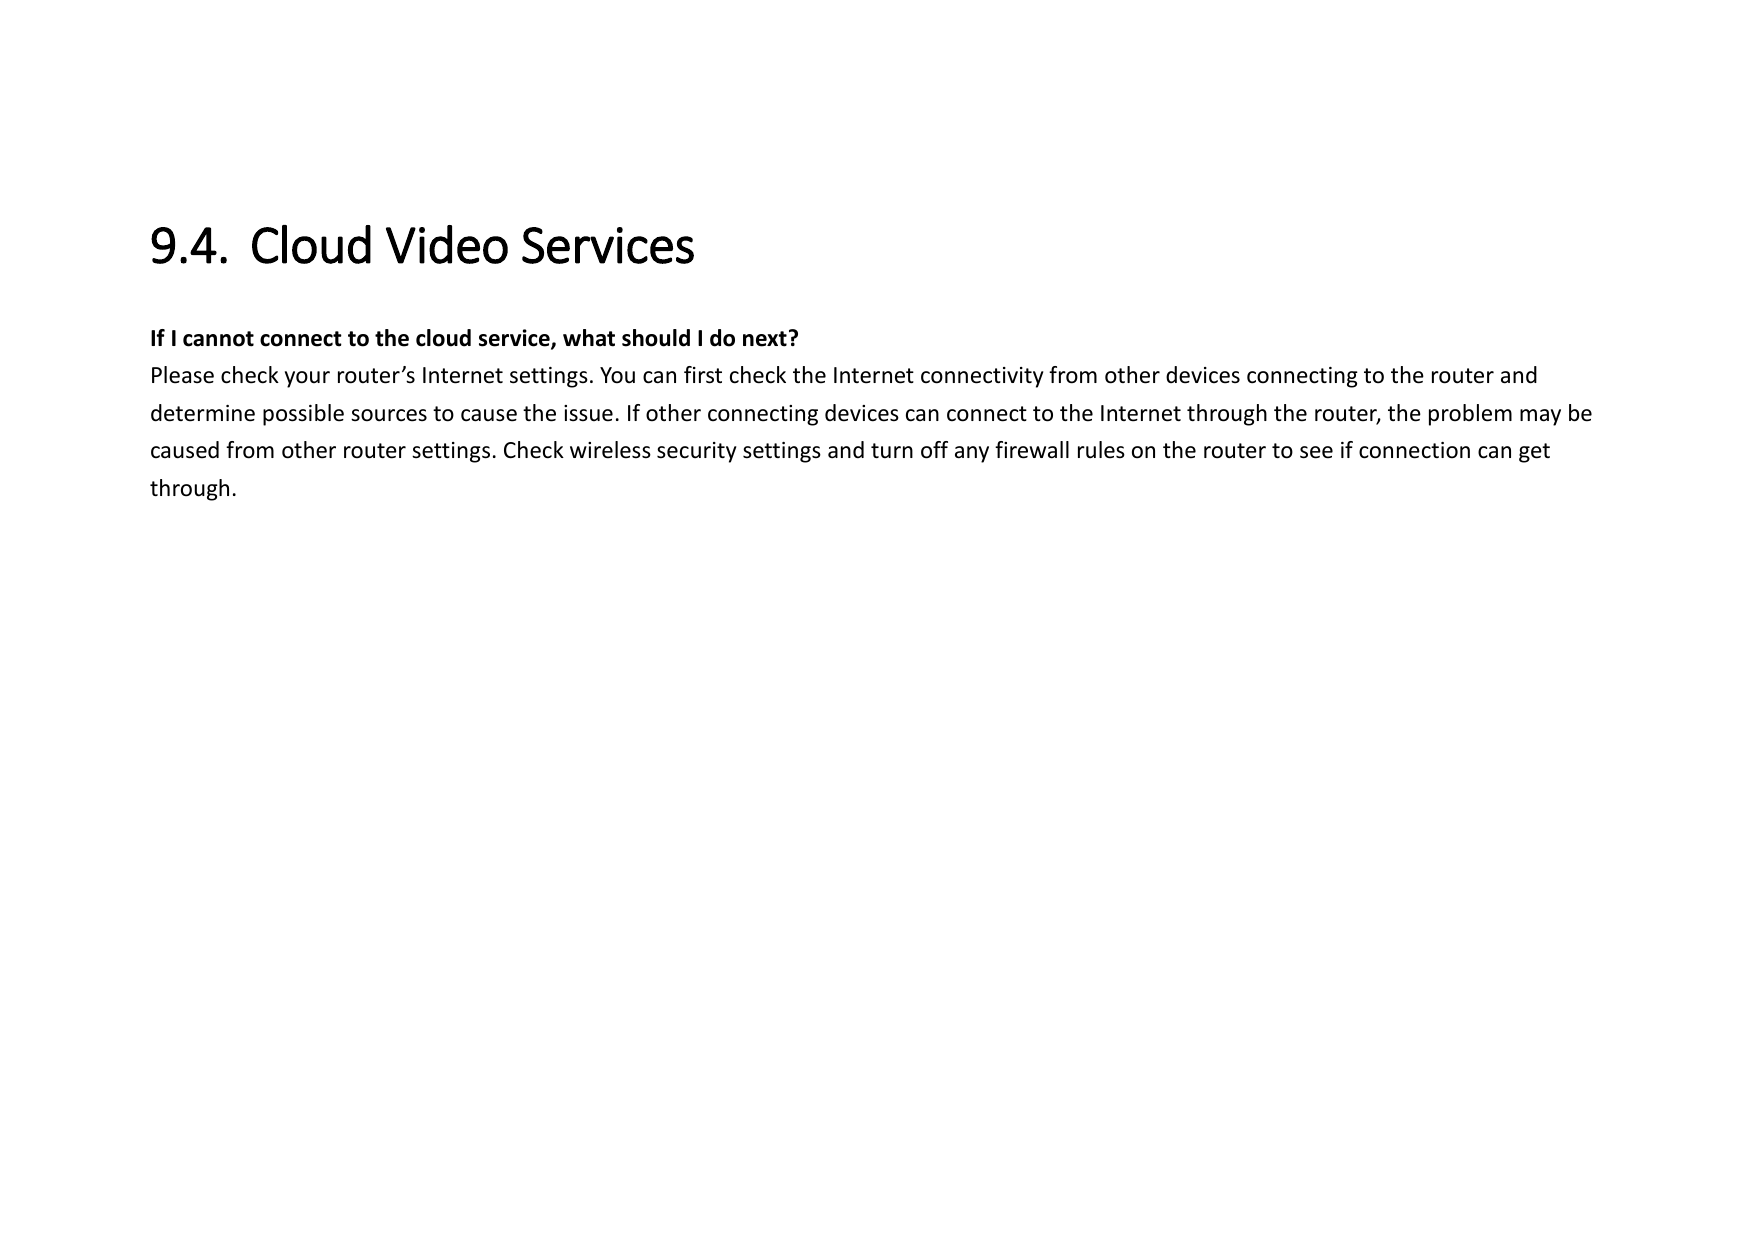 9.4. Cloud Video Services   If I cannot connect to the cloud service, what should I do next?   Please check your router’s Internet settings. You can first check the Internet connectivity from other devices connecting to the router and determine possible sources to cause the issue. If other connecting devices can connect to the Internet through the router, the problem may be caused from other router settings. Check wireless security settings and turn off any firewall rules on the router to see if connection can get through.   